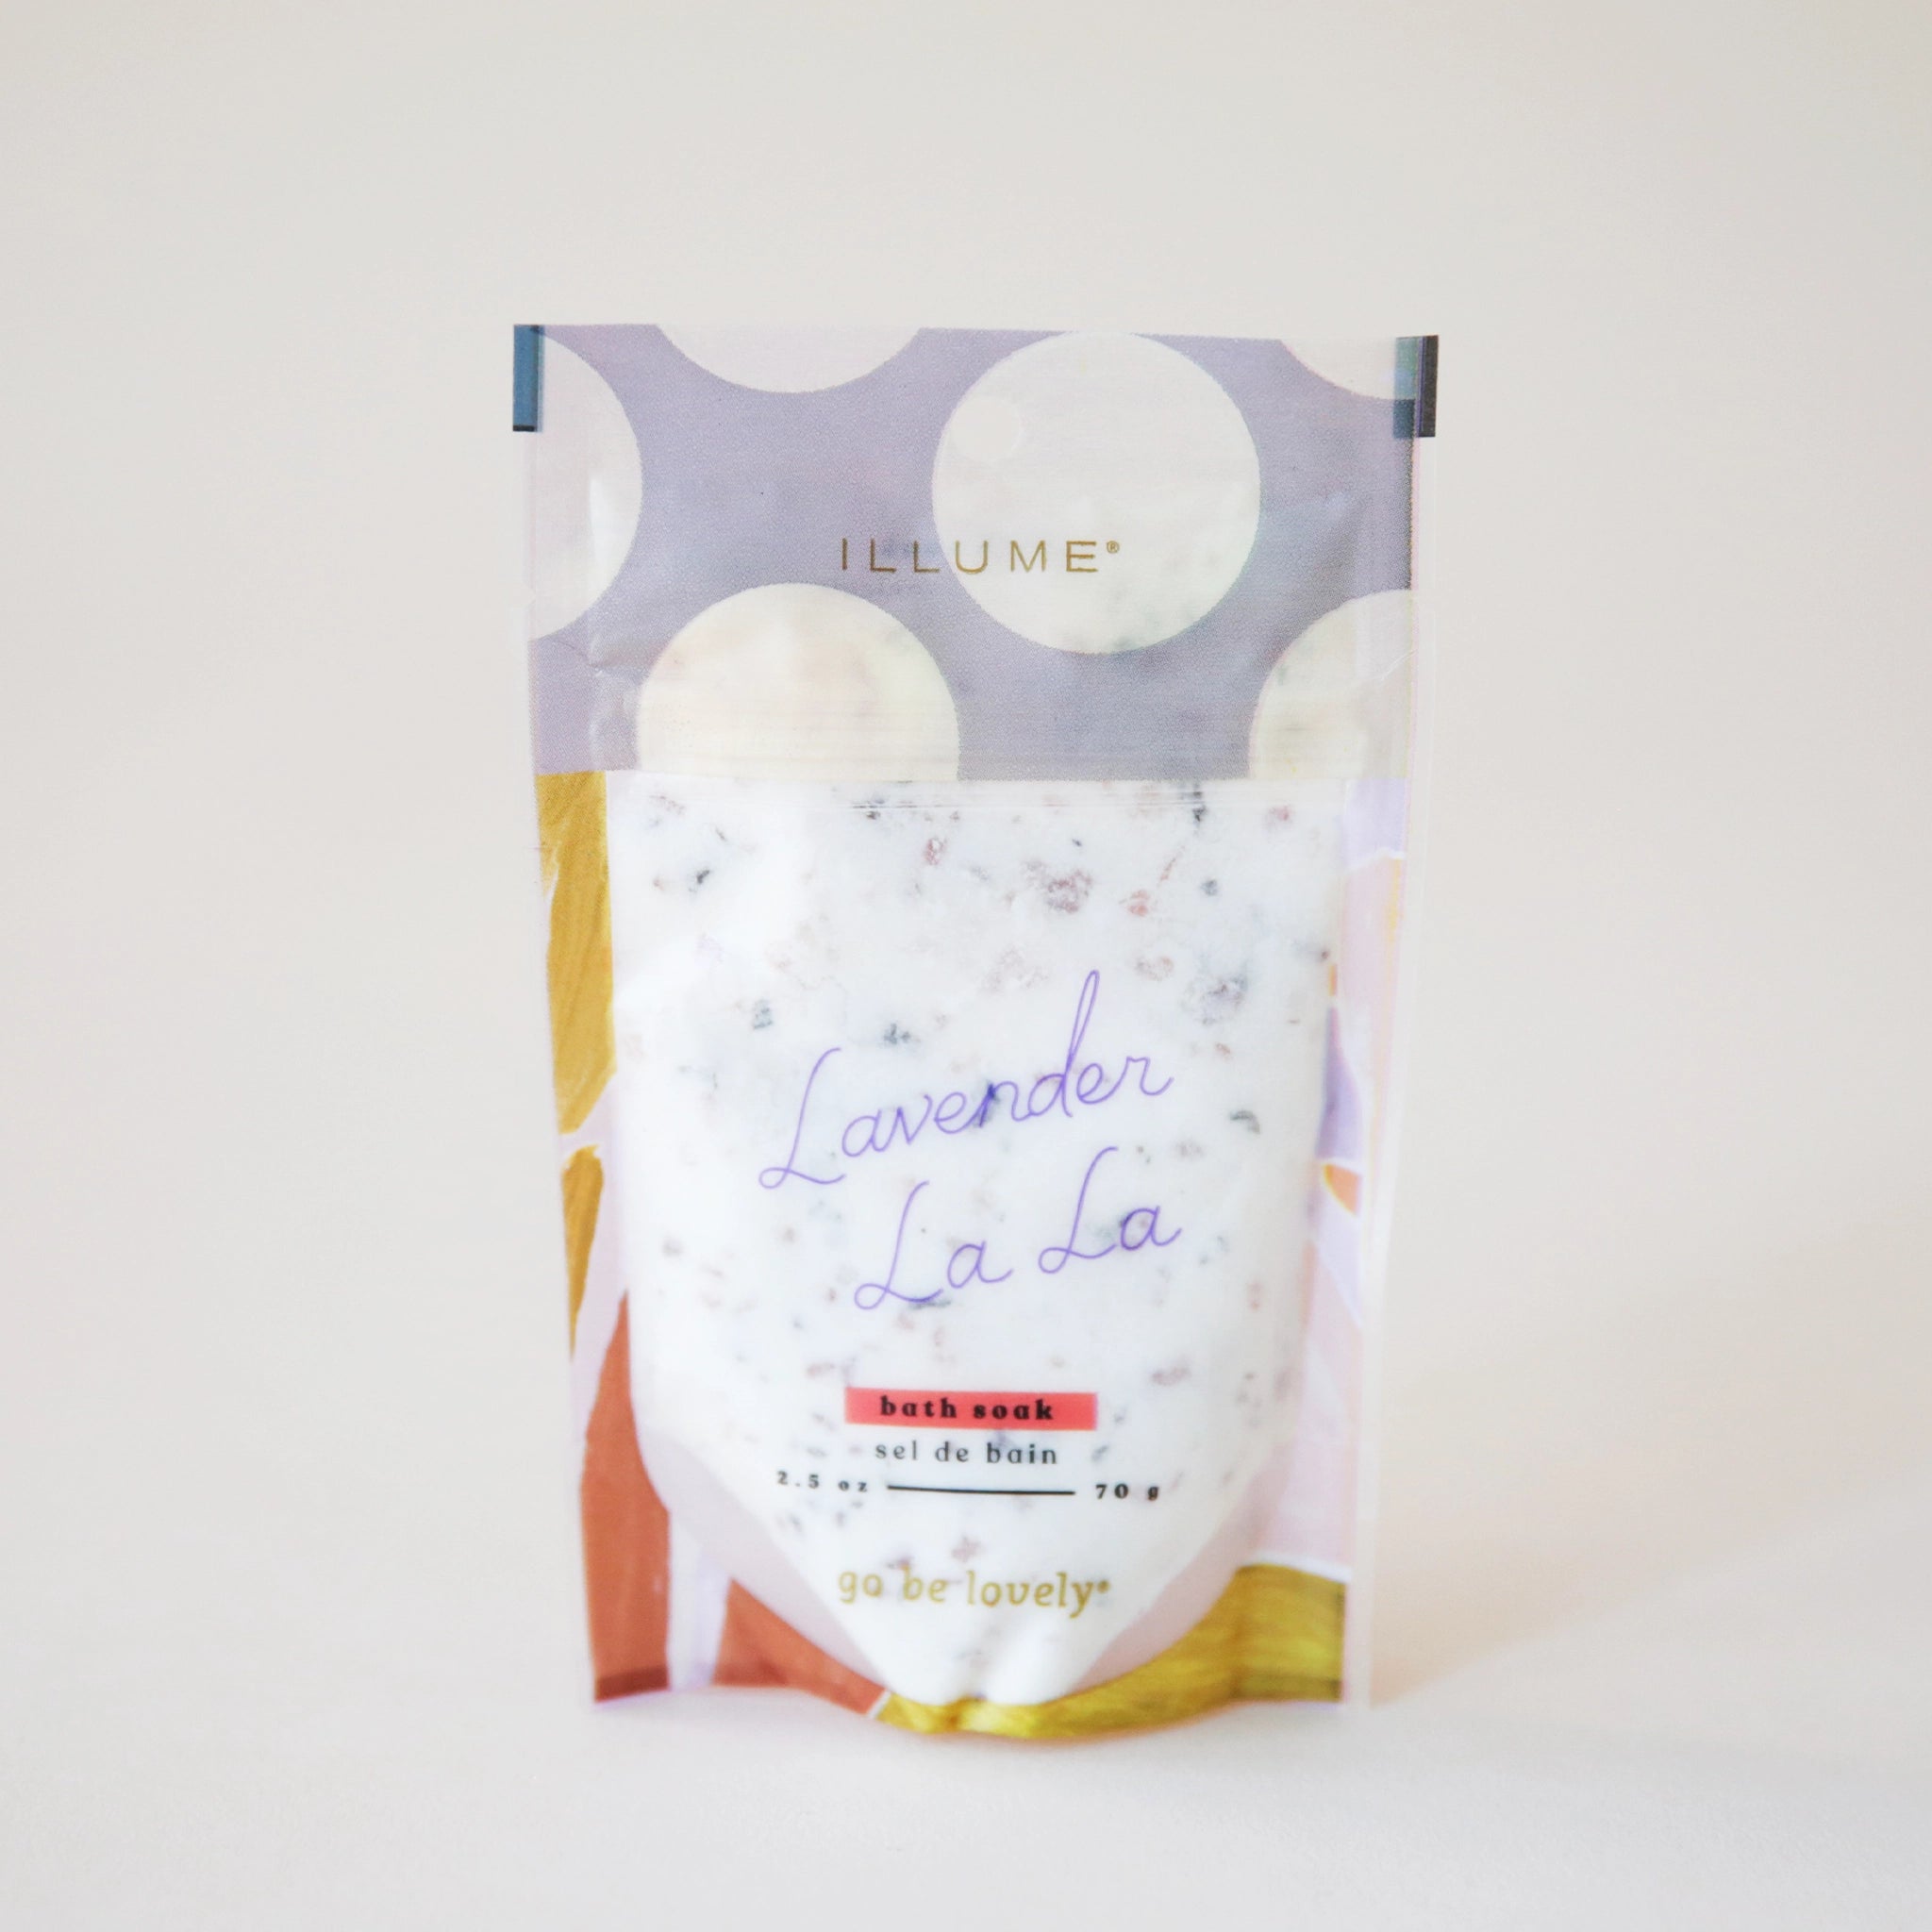 A bag of lavender scented bath soak, featuring a lavender and cream polka dot bag along with accents of yellow and rust and text on the front that reads, "Lavender La La Bath Soak".